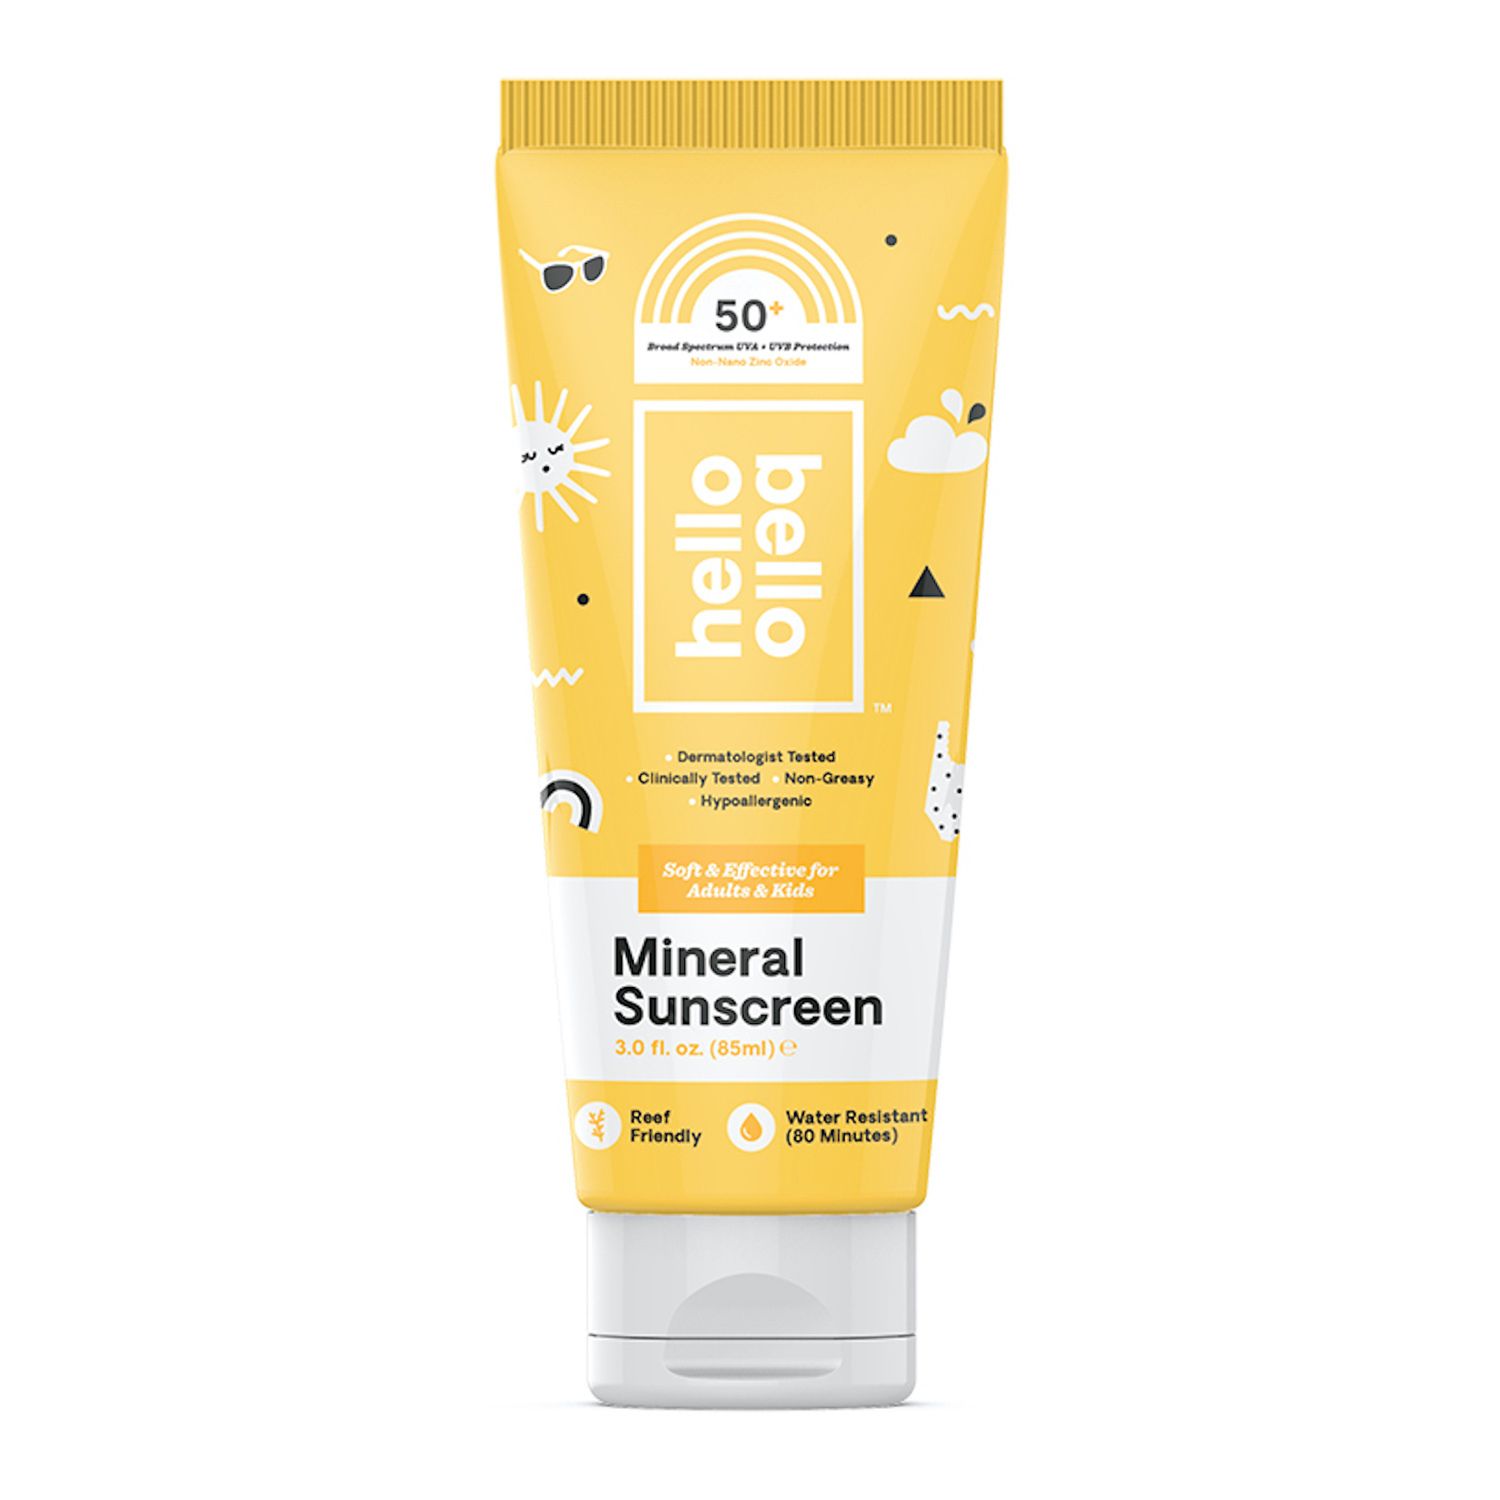 Image for Hello Bello Mineral Sunscreen Lotion- SPF 50 at Kohl's.